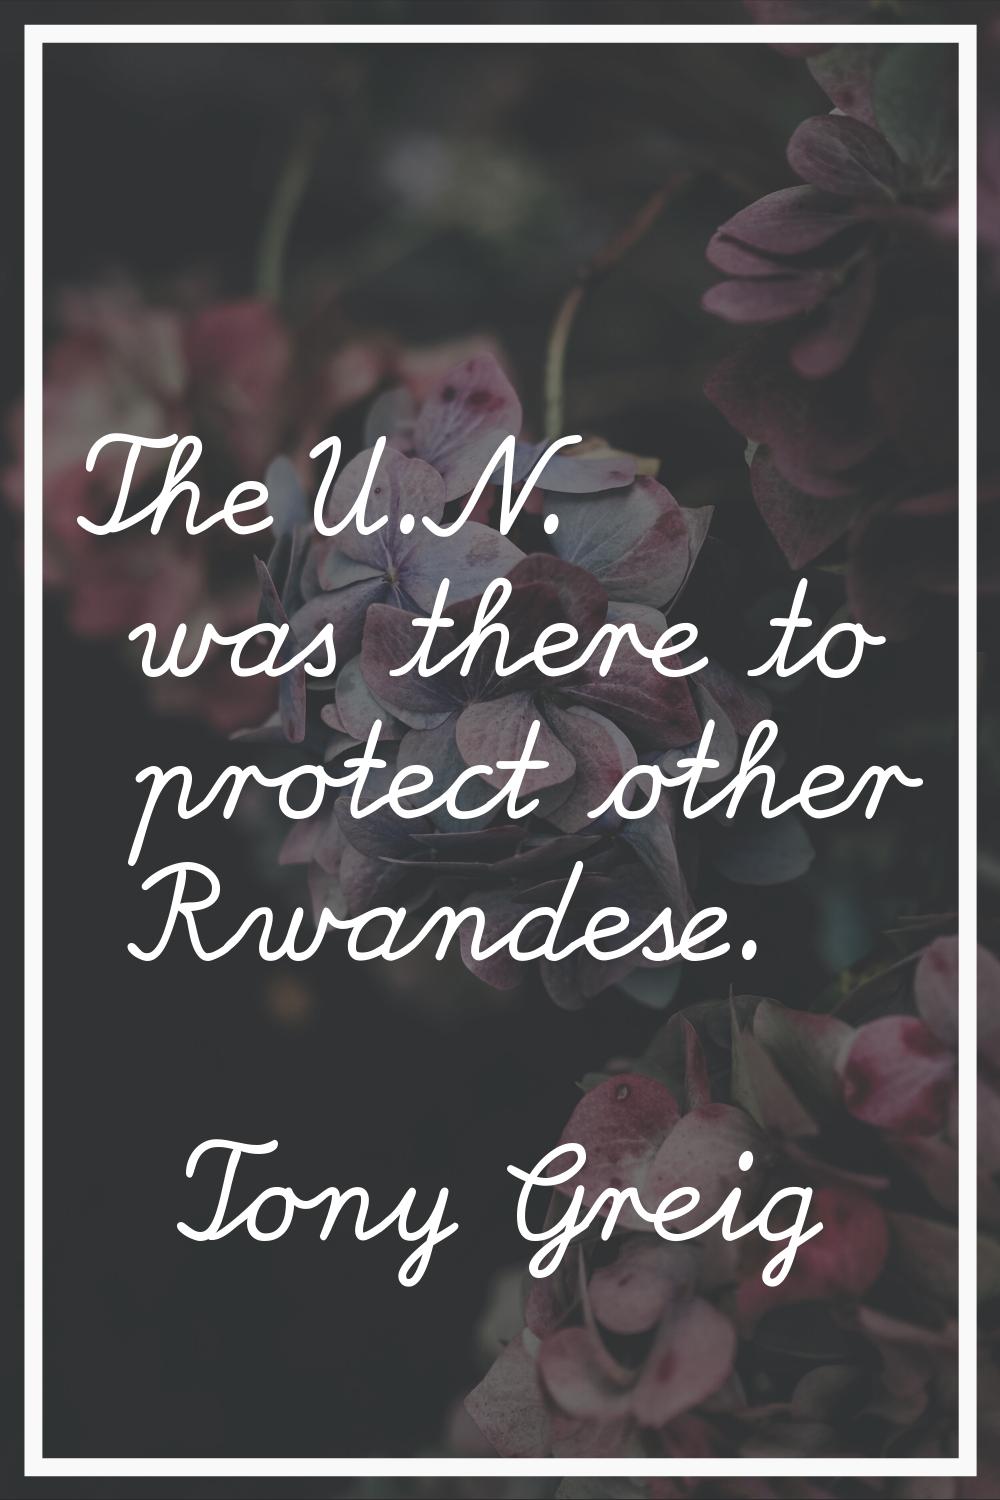 The U.N. was there to protect other Rwandese.